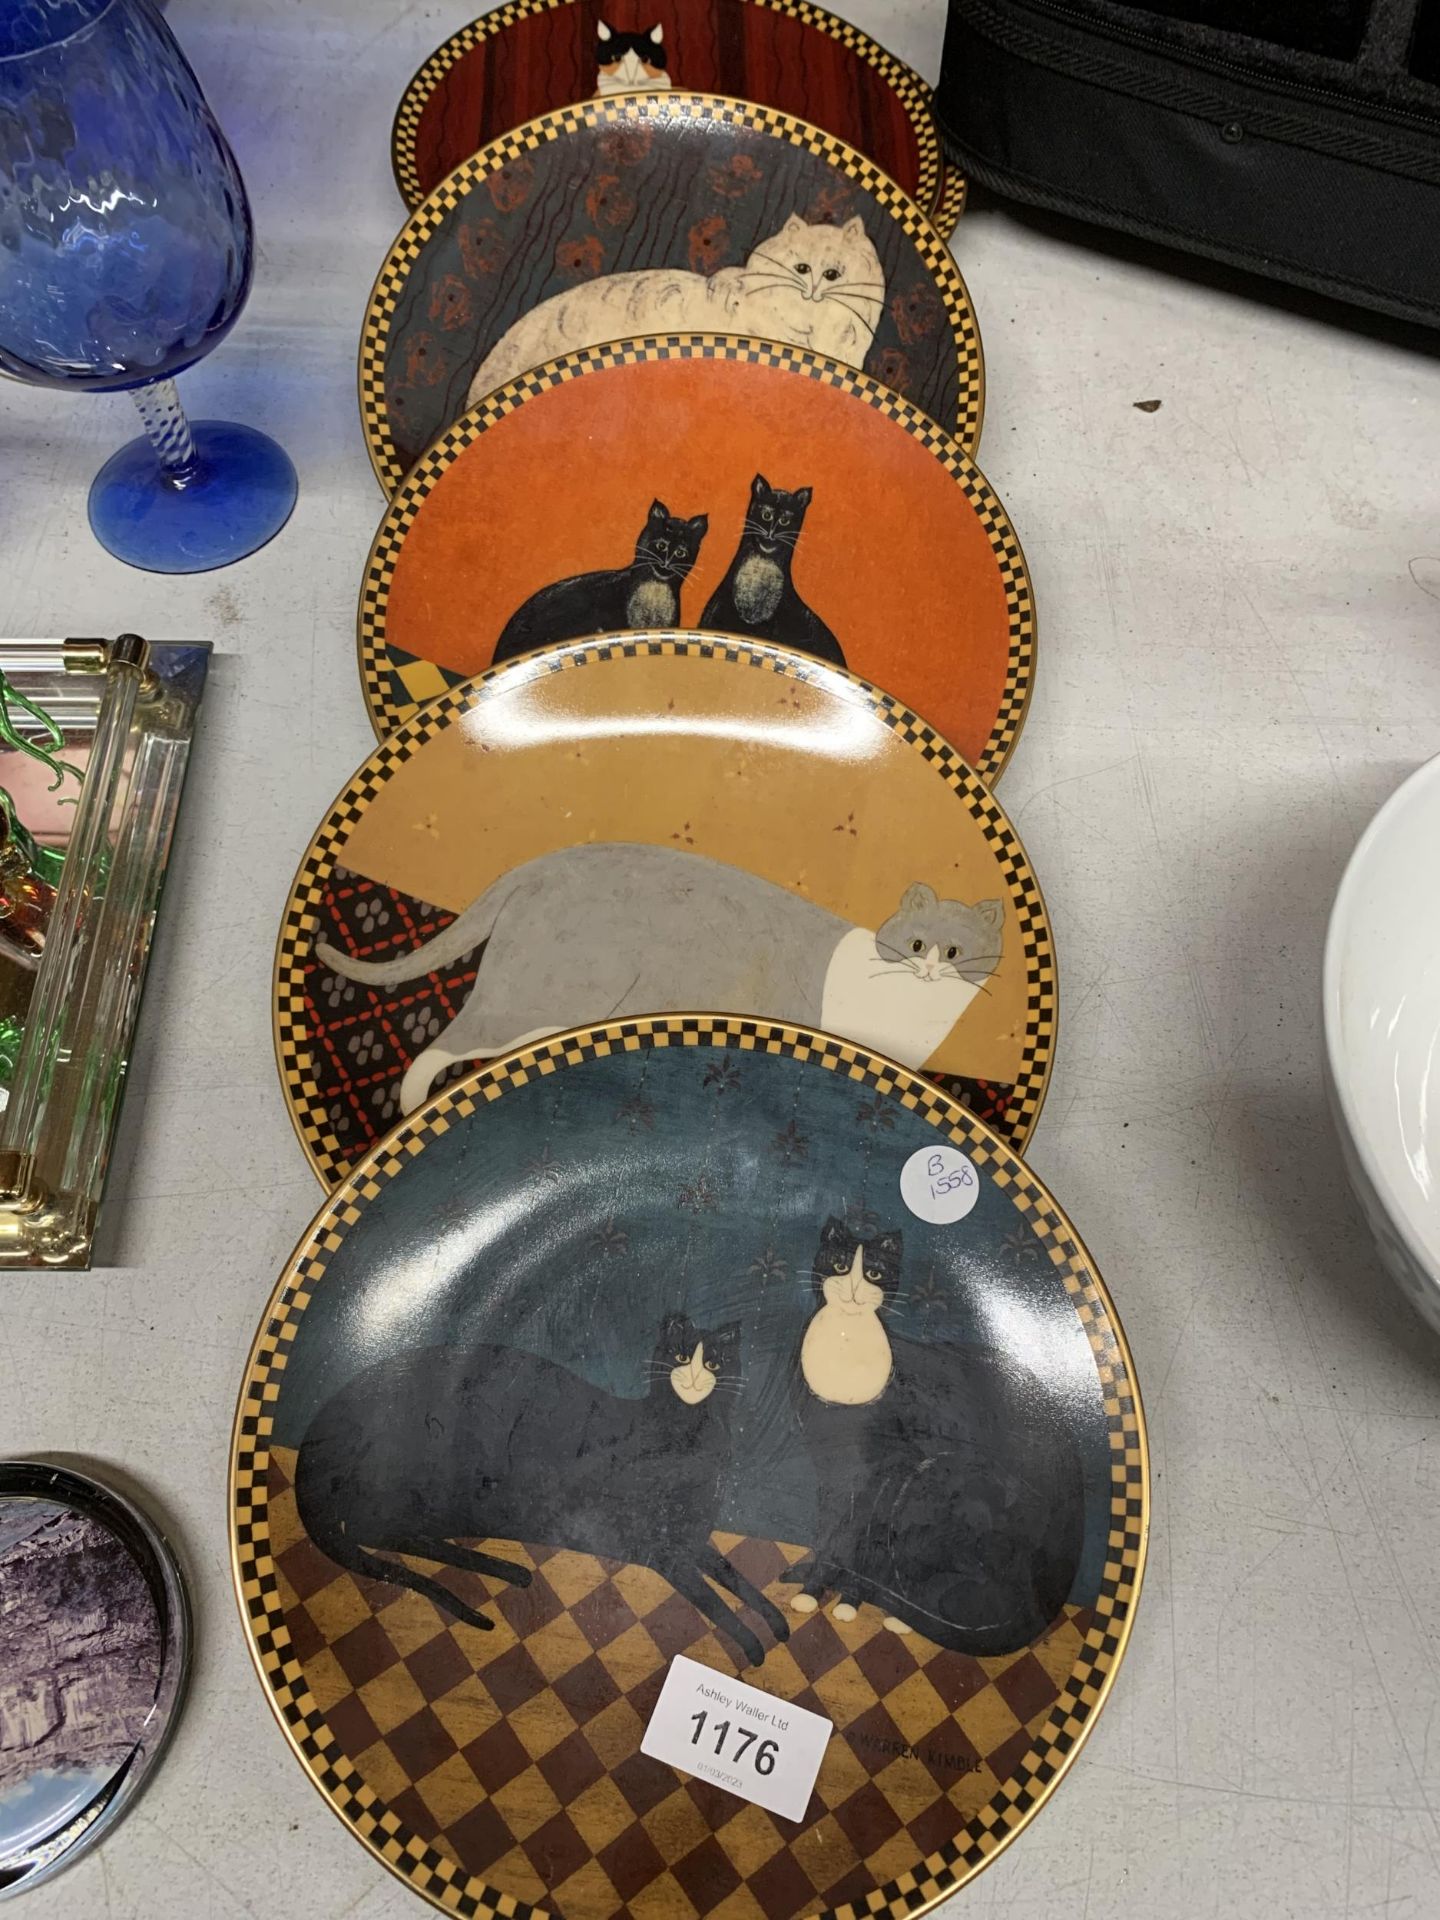 A QUANTITY OF CAT CABINET/WALL PLATES IN THE 'PROPER CATS' COLLECTION BY WARREN KIMBLE - 5 IN TOTAL